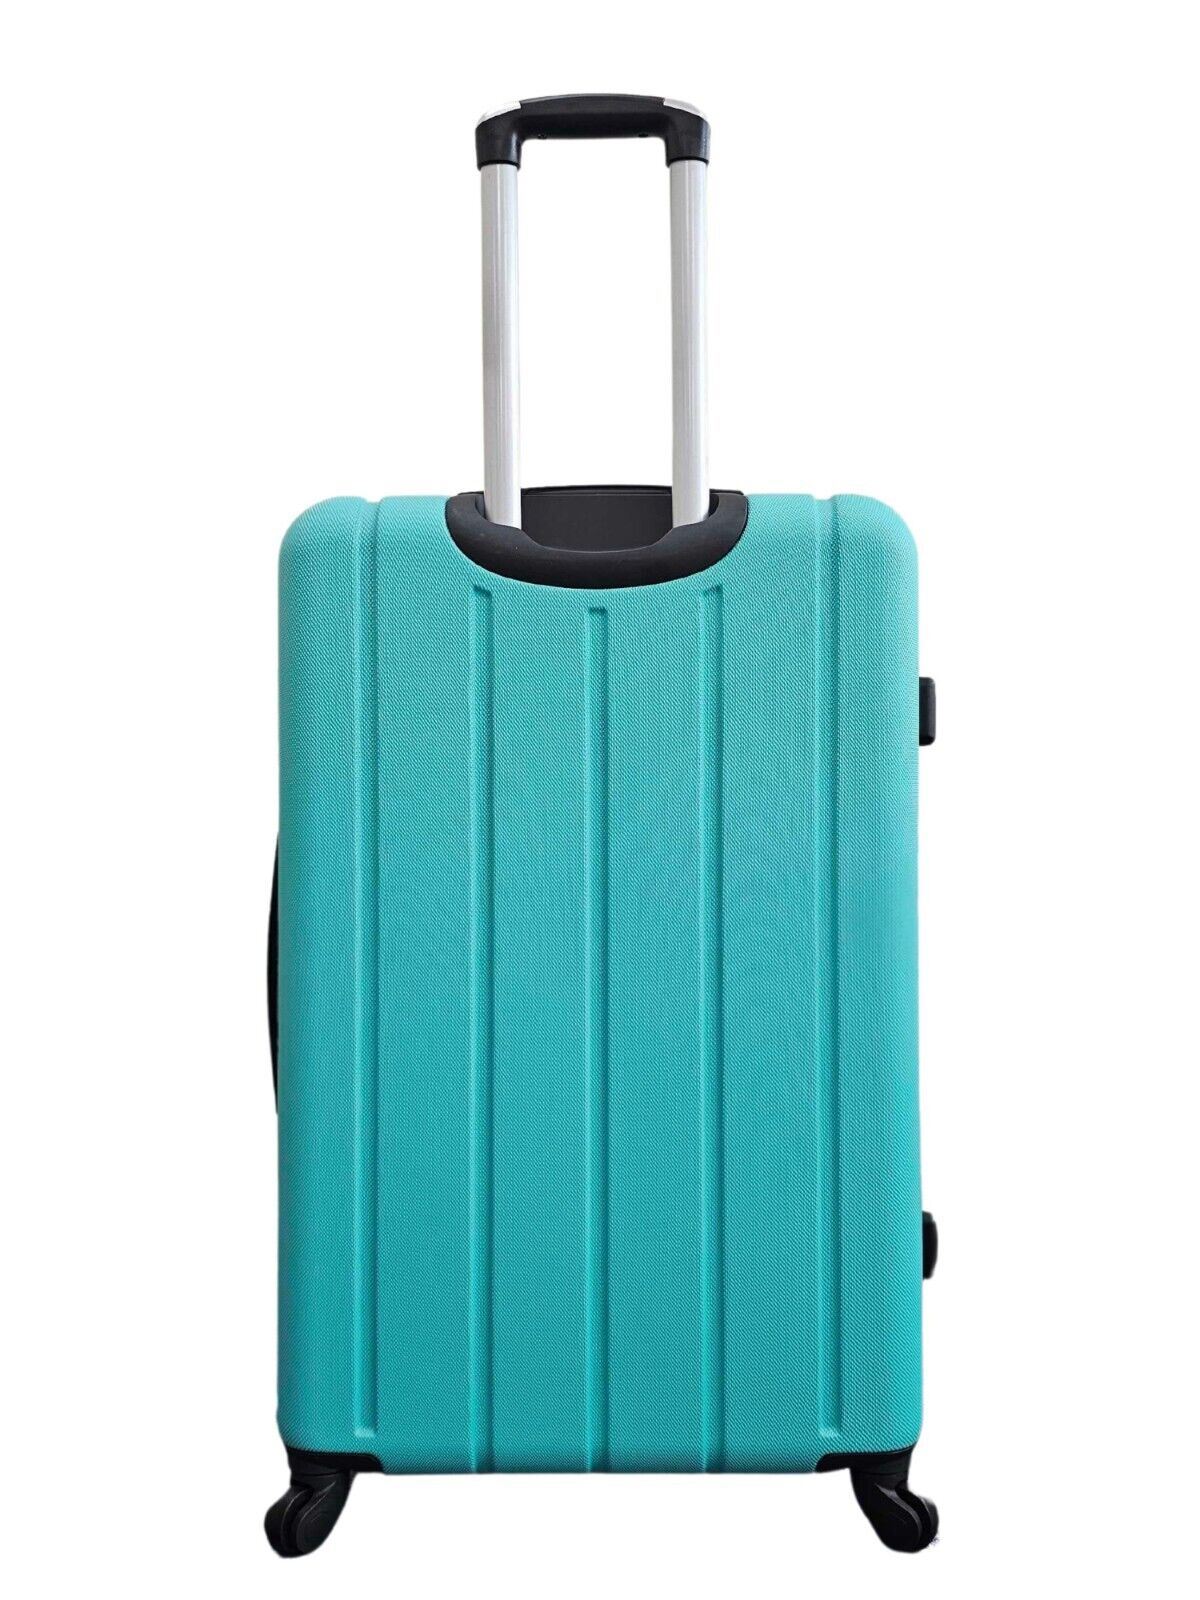 Castleberry Large Hard Shell Suitcase in Teal